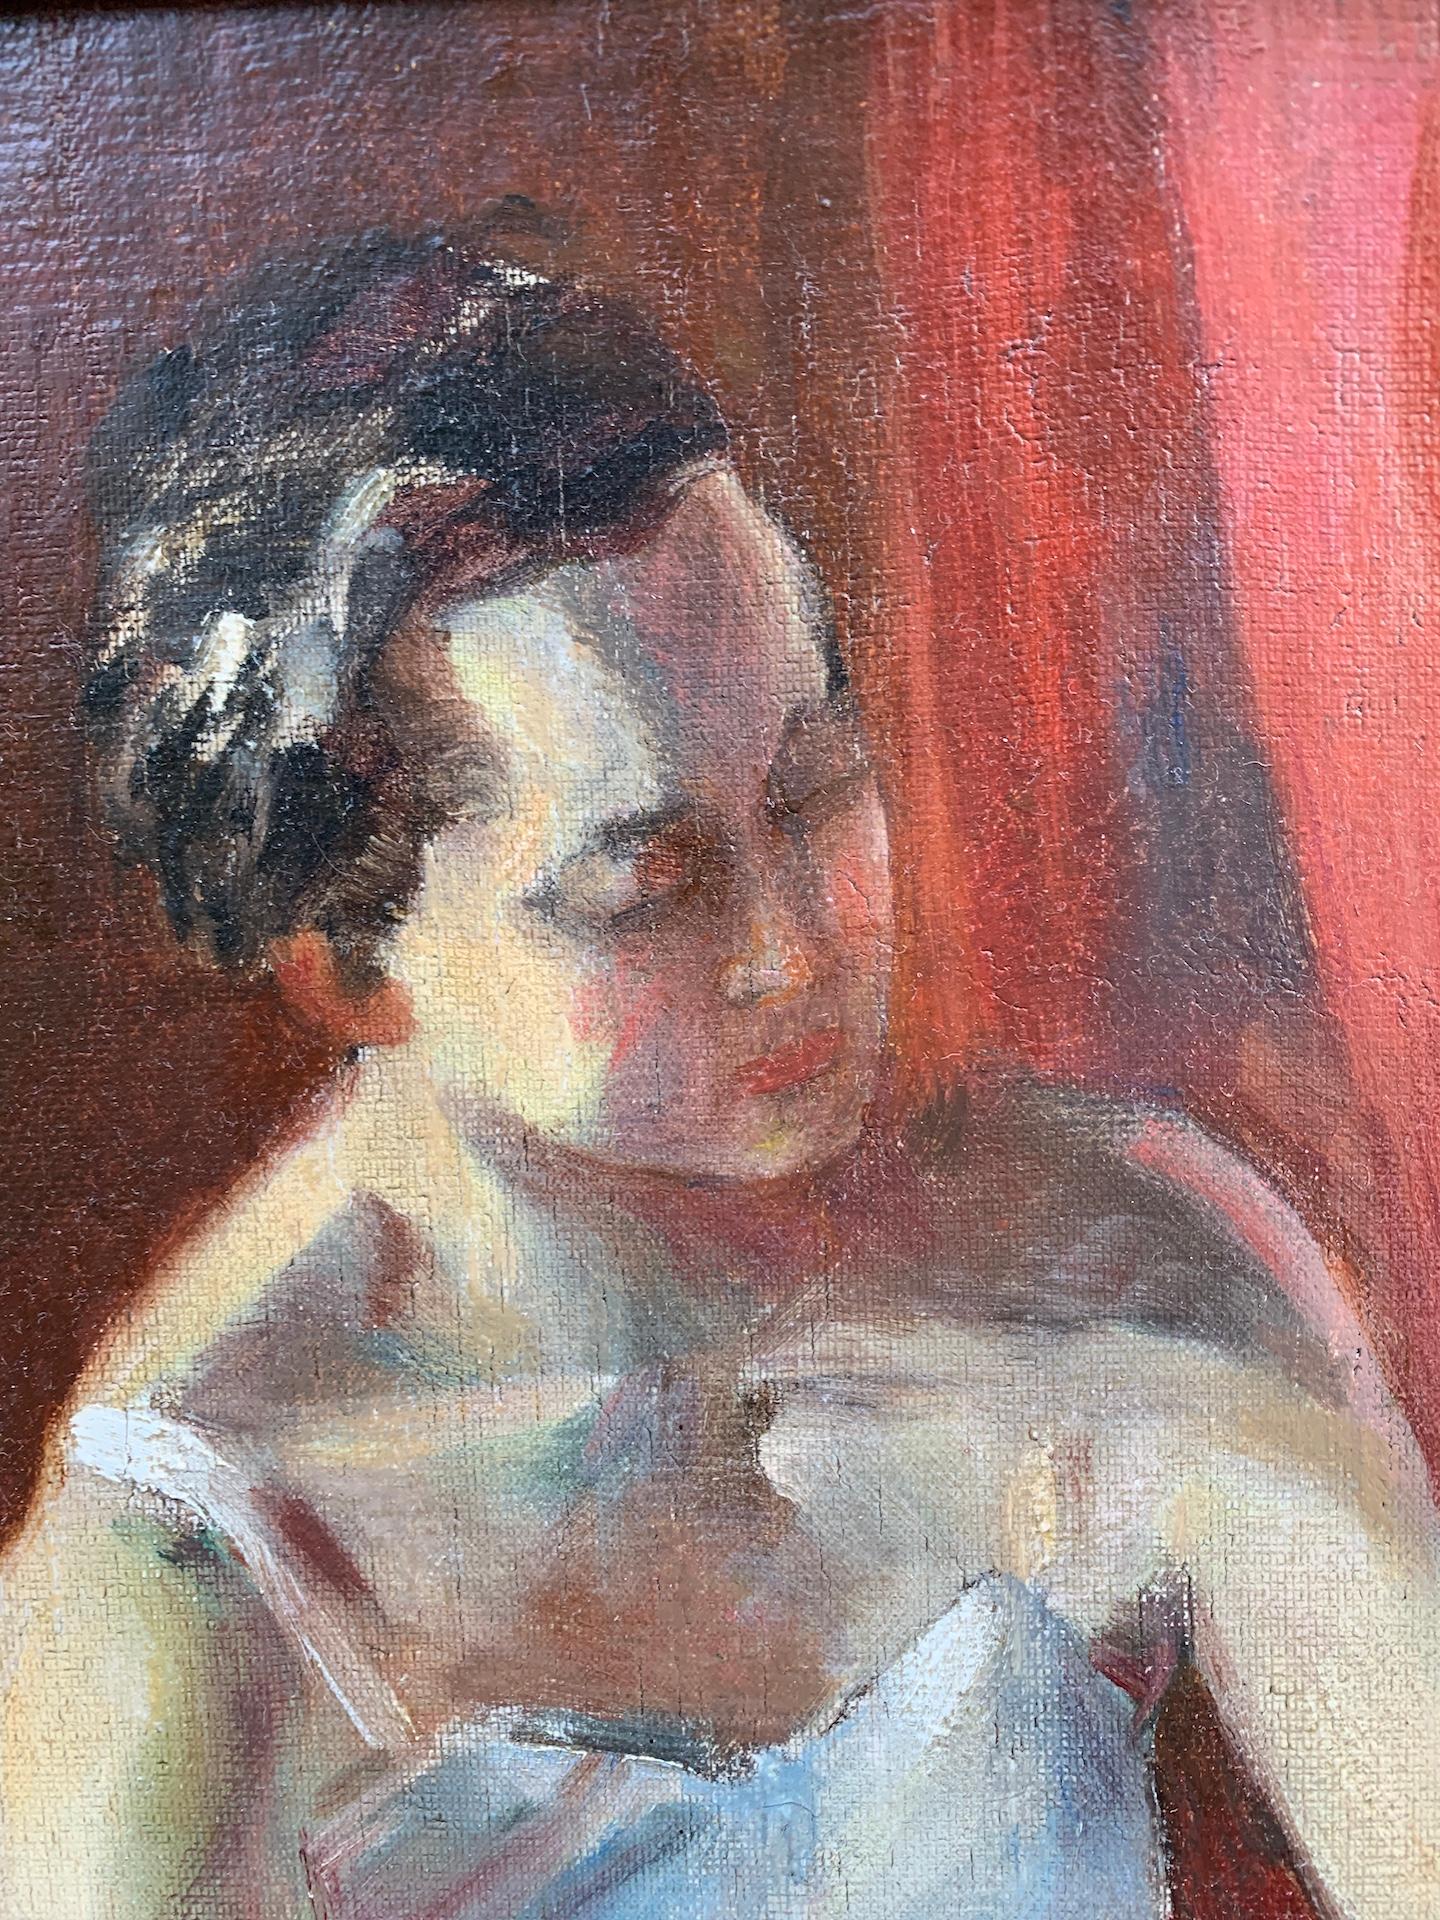 Early 20th century French oil, seated ballerina adjusting her ballet slipper. - Brown Figurative Painting by Impressionist French School